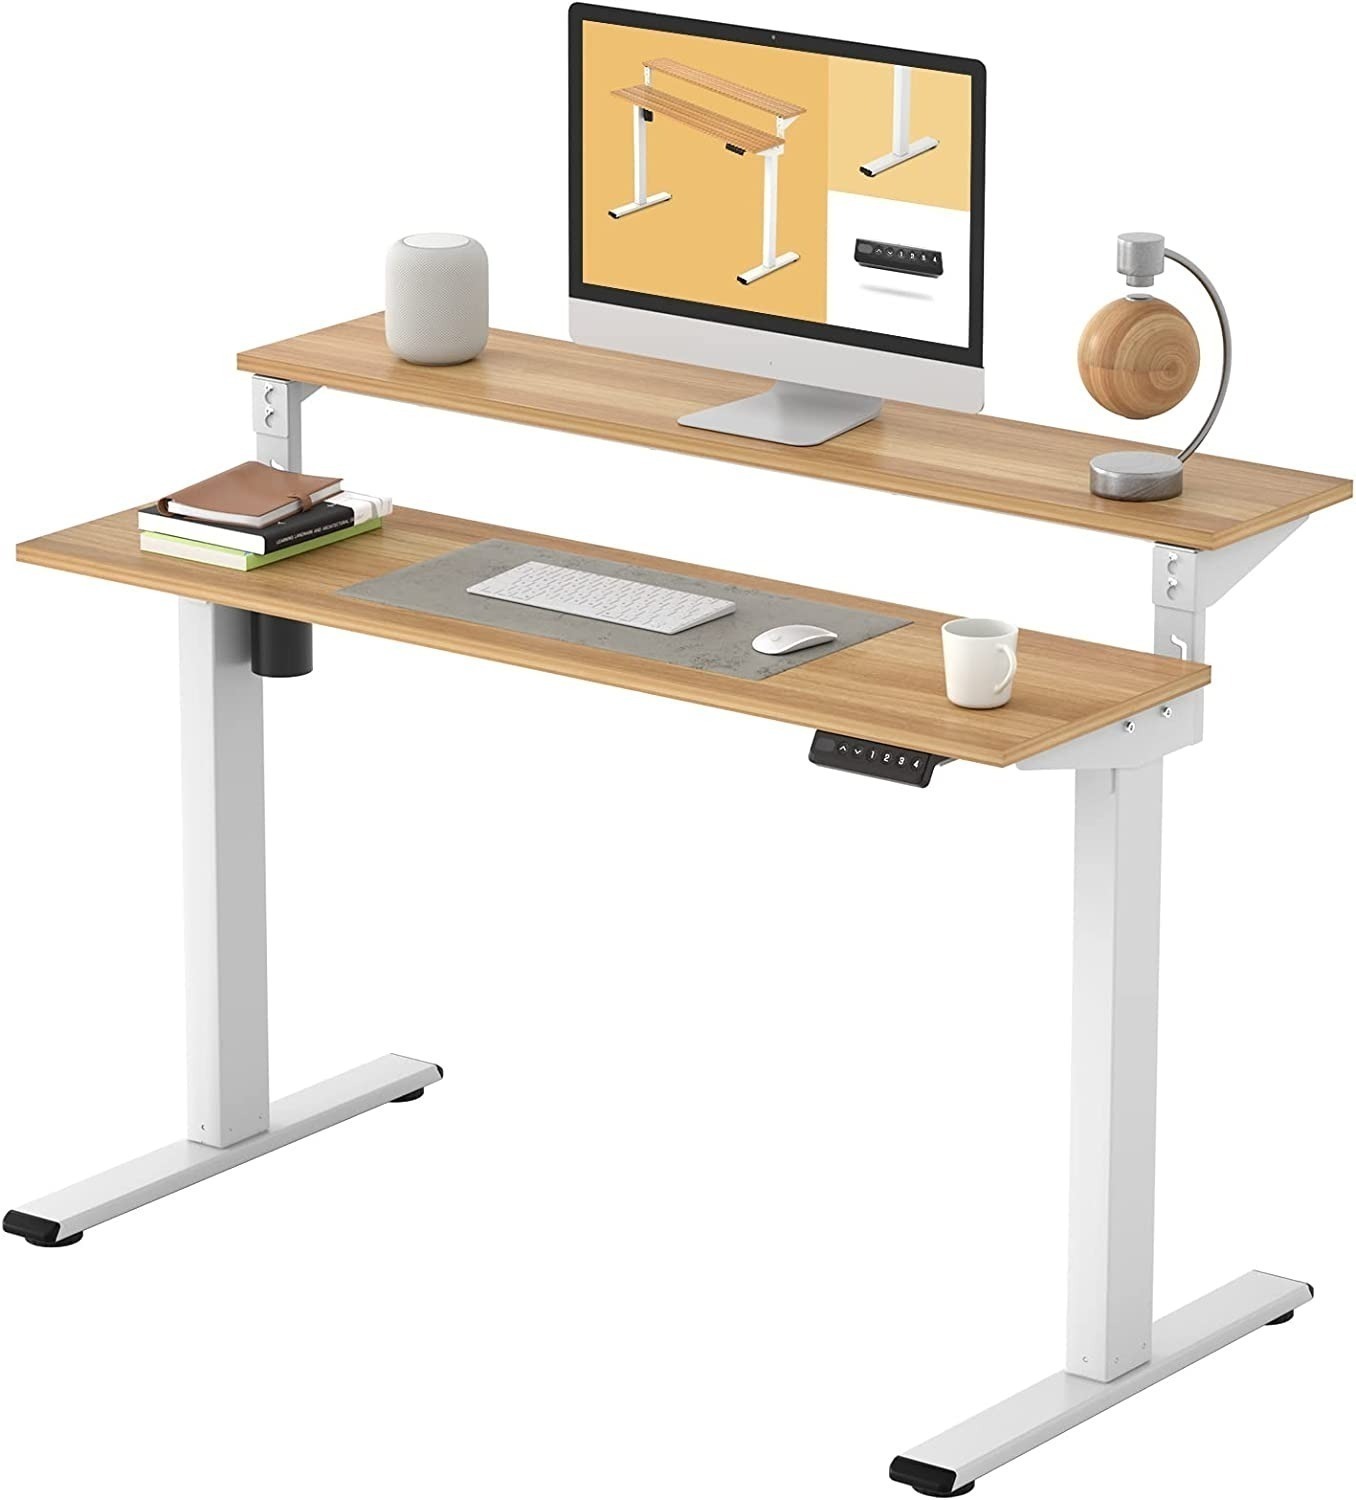 FLEXISPOT EF1 2-Tier Height Adjustable Electric Standing Desk (48" x 24") $180 + Free Shipping